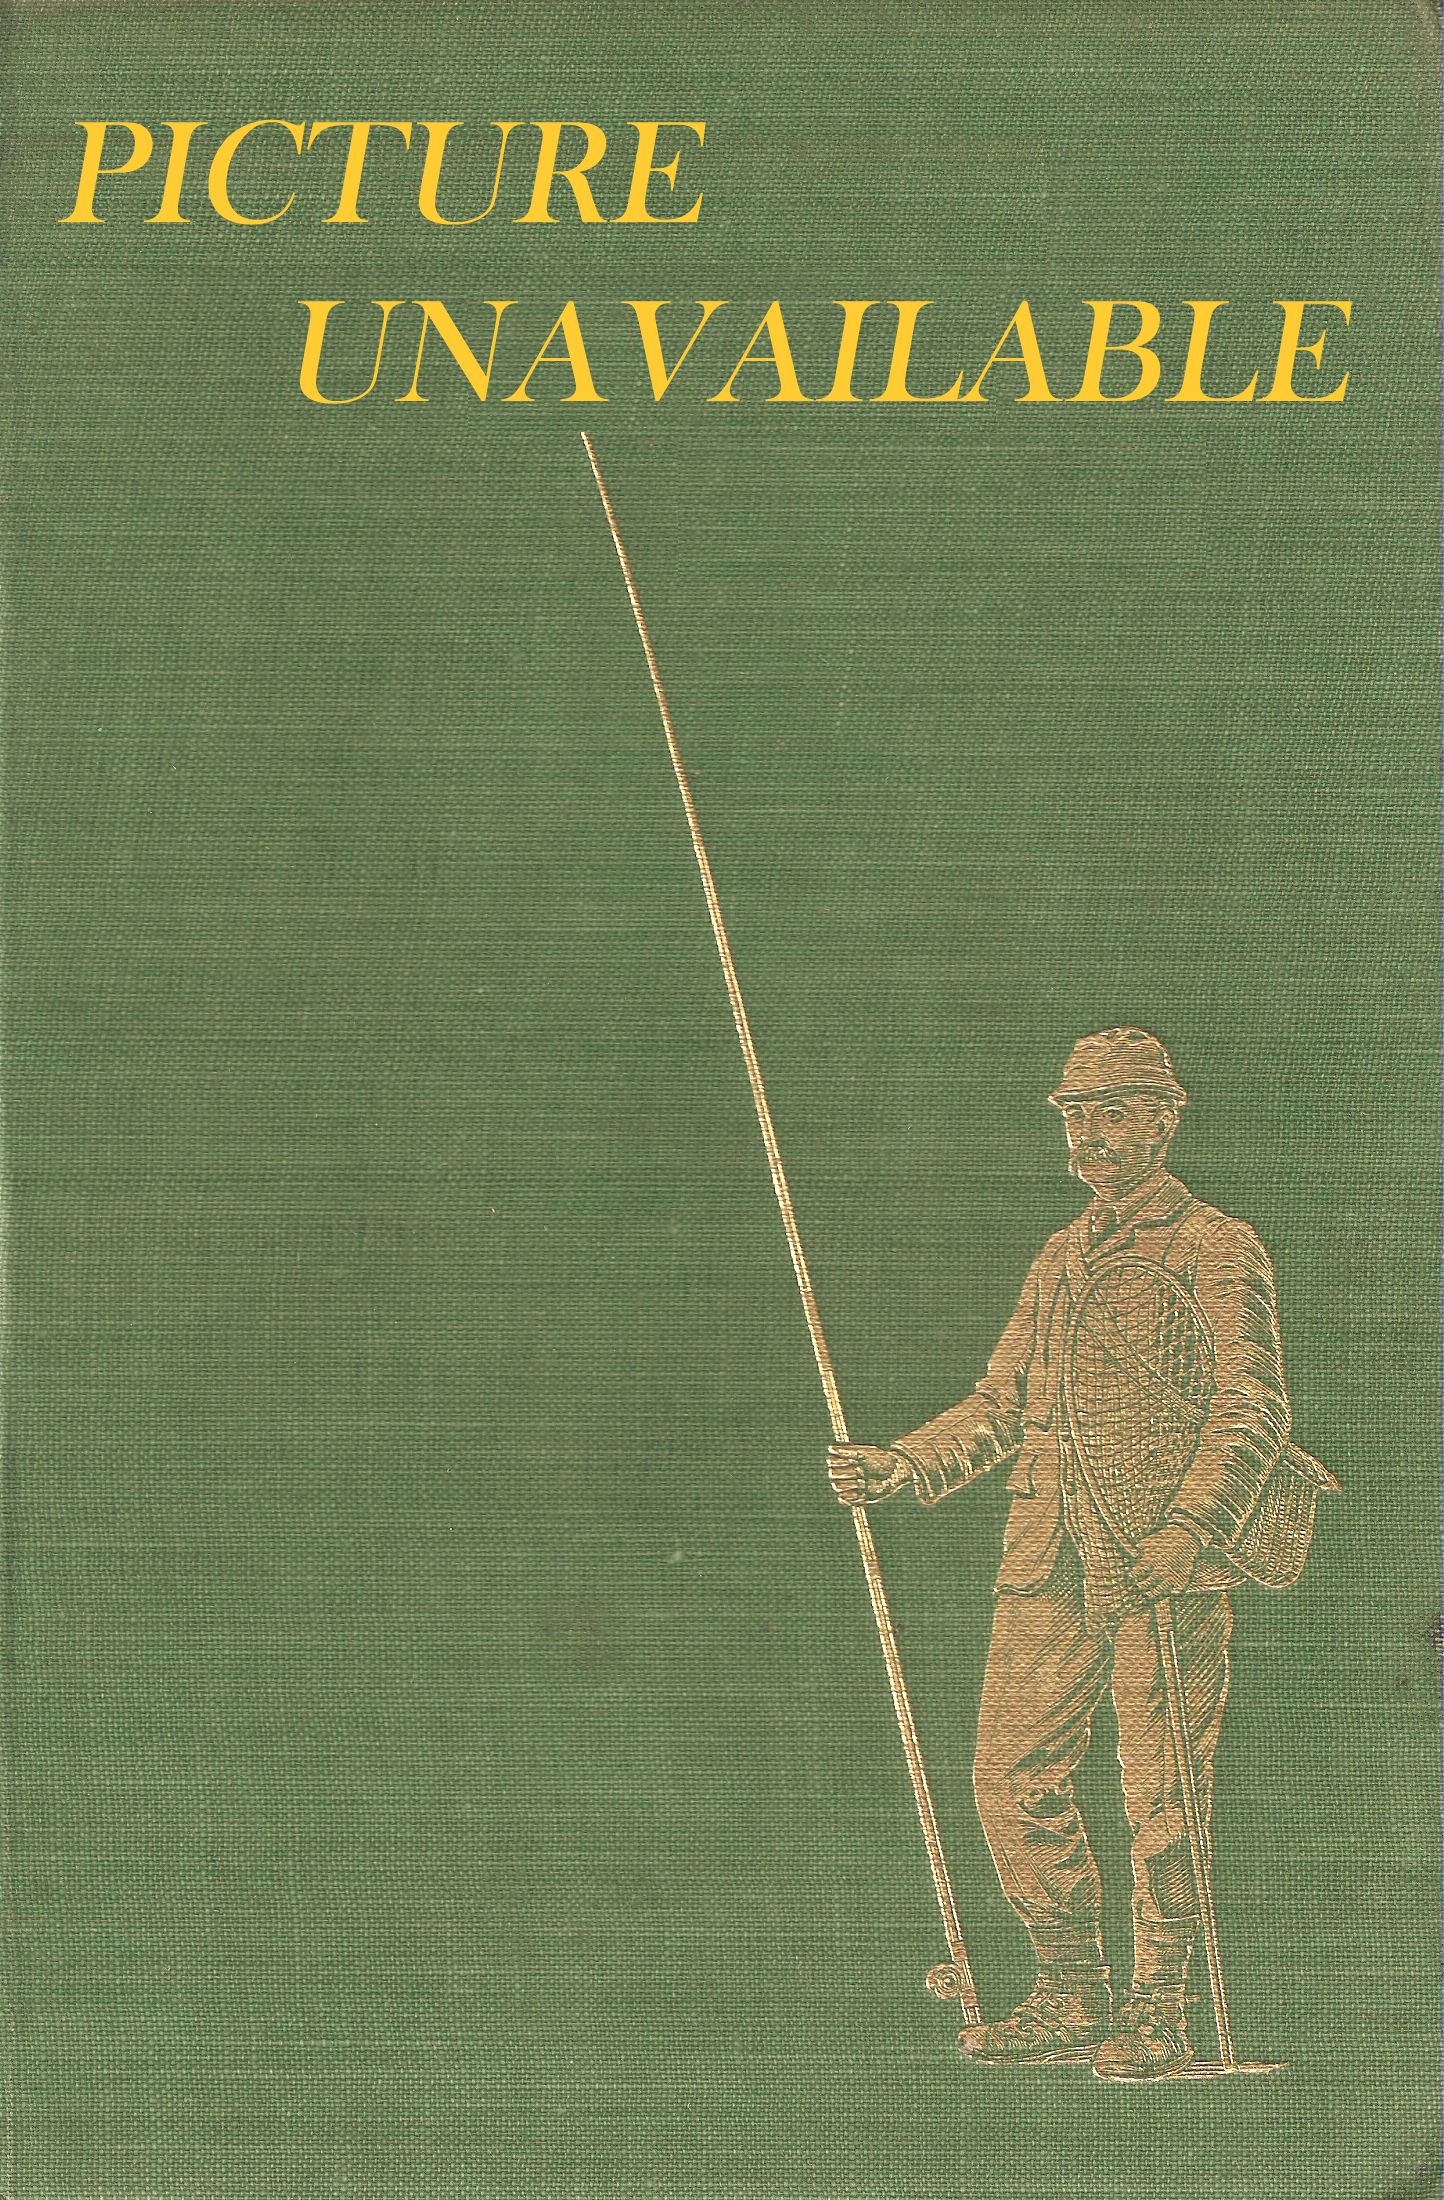 THE THIRD ANGLING TIMES BOOK. Edited by Peter Tombleson and Jack  Thorndike. Illustrated by Ernest V. Petts.